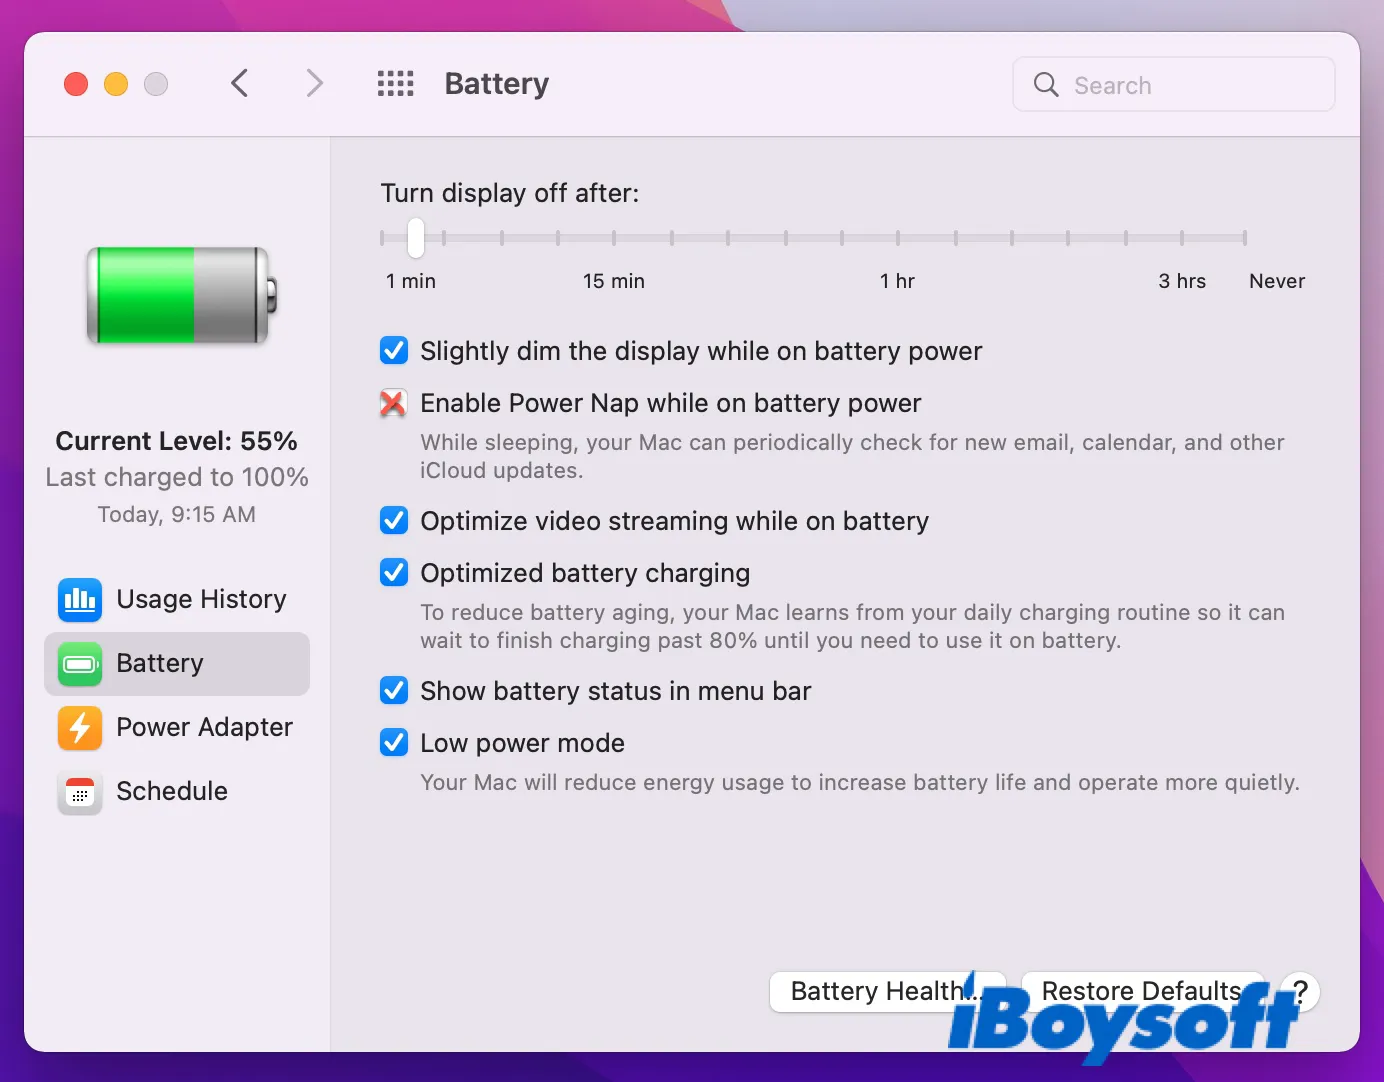 disable power nap in Battery preferences pane